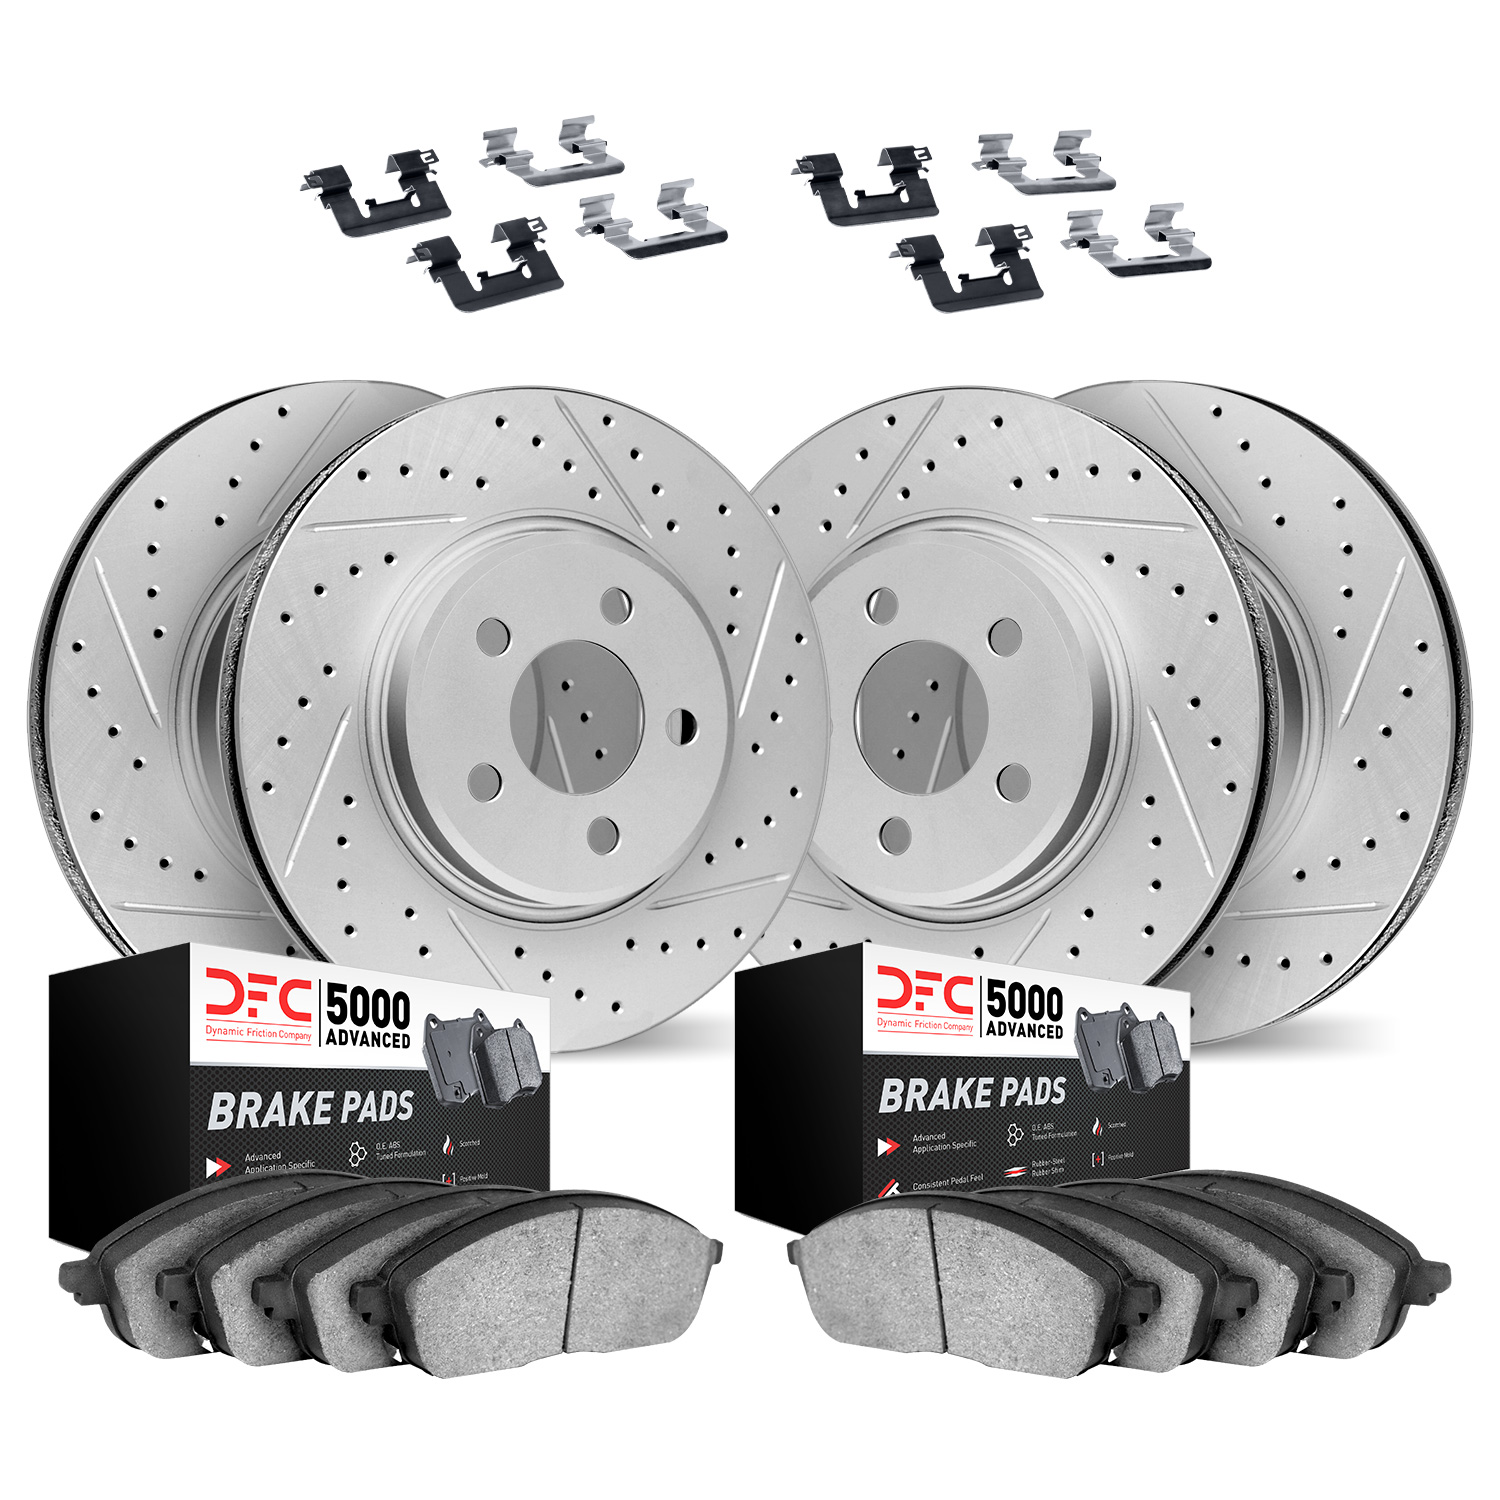 2514-45016 Geoperformance Drilled/Slotted Rotors w/5000 Advanced Brake Pads Kit & Hardware, 2010-2017 GM, Position: Front and Re